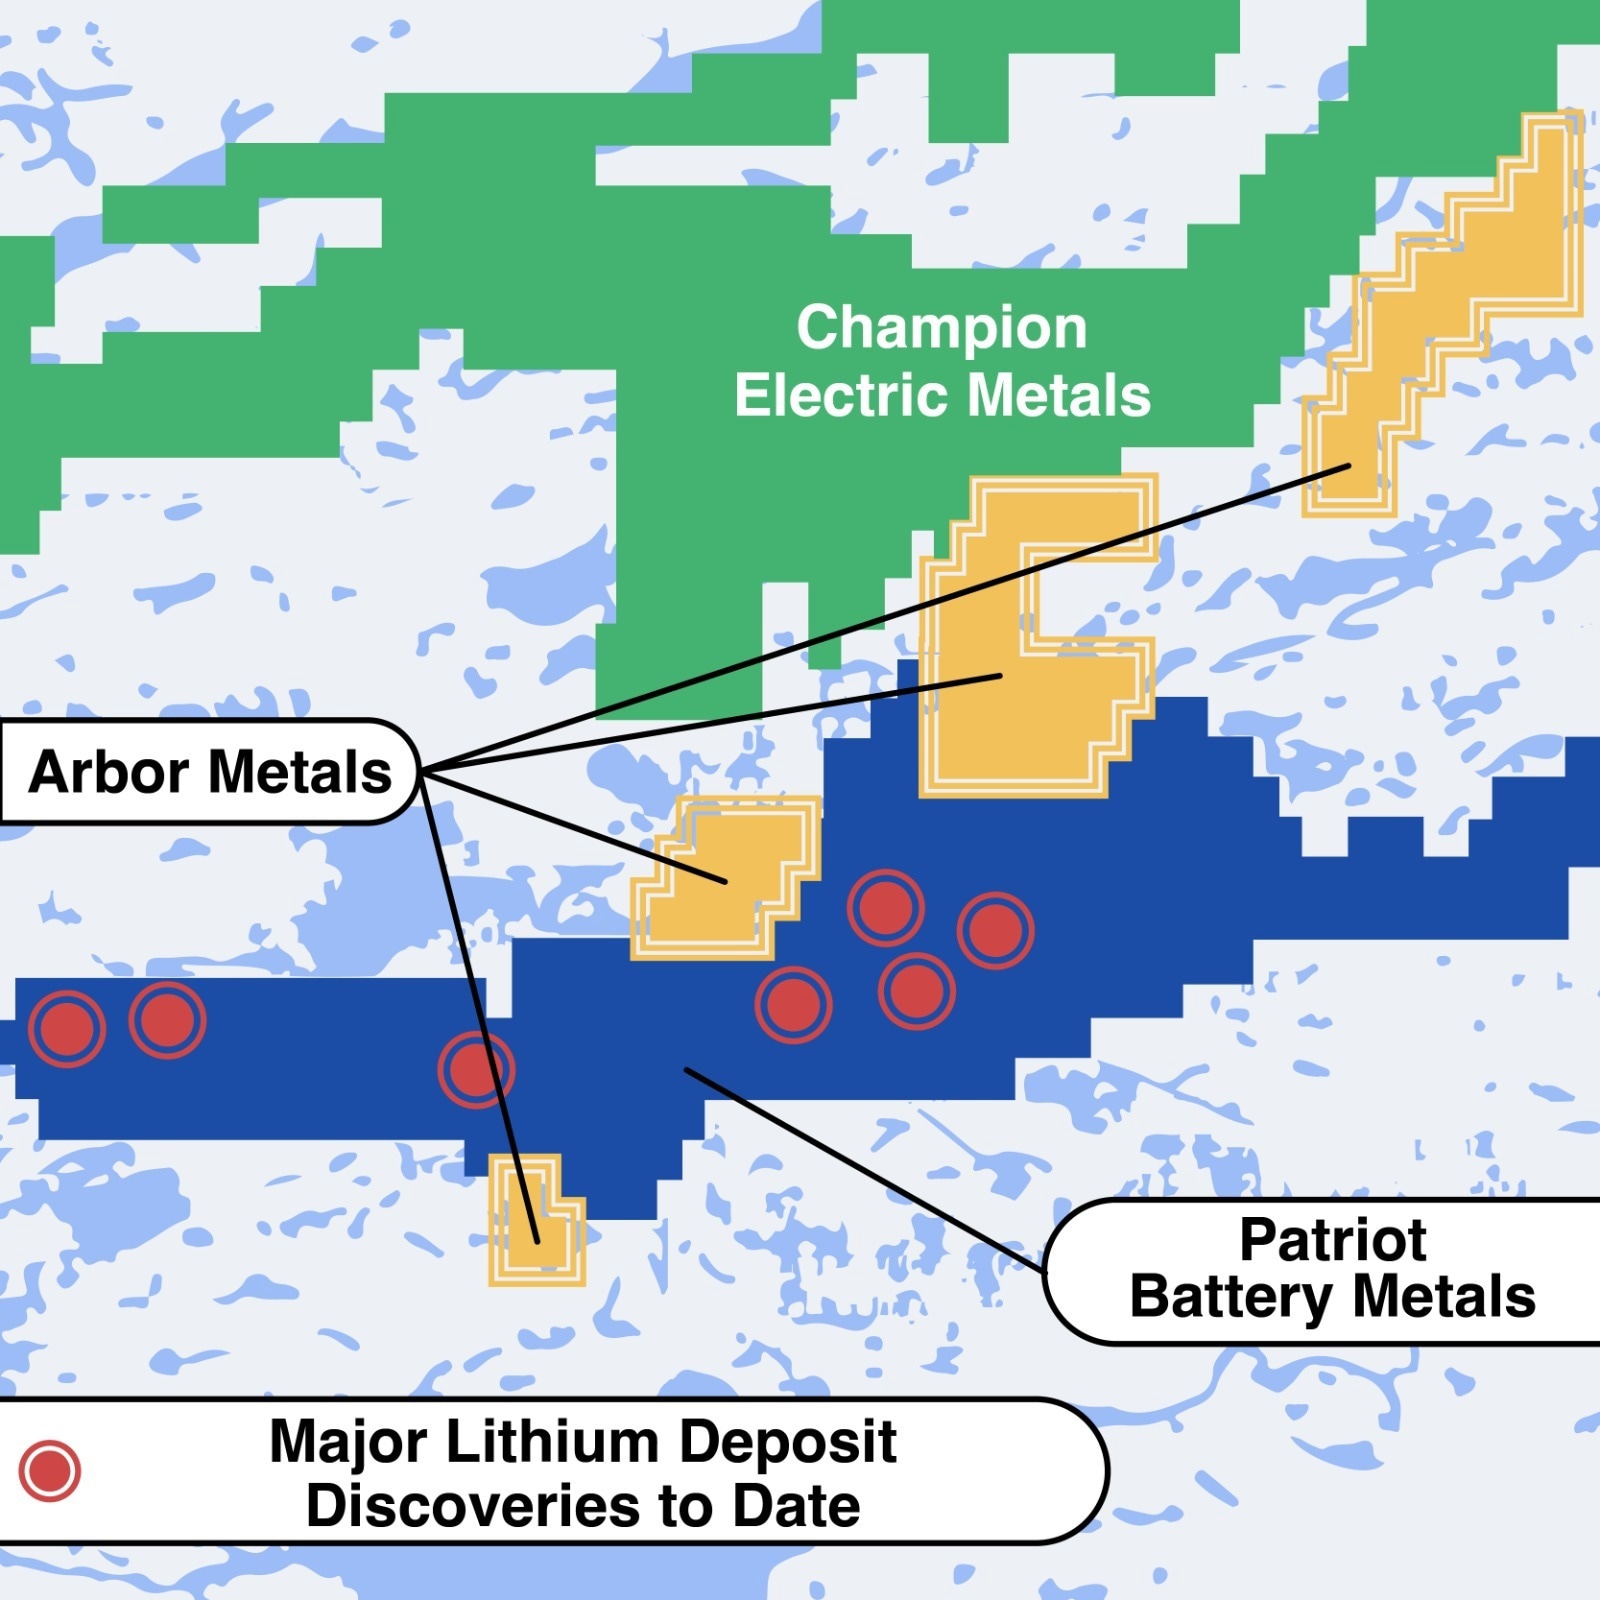 Arbor Metals Announces the Resumption of Exploration Activities at its Jarnet Lithium Project in Quebec